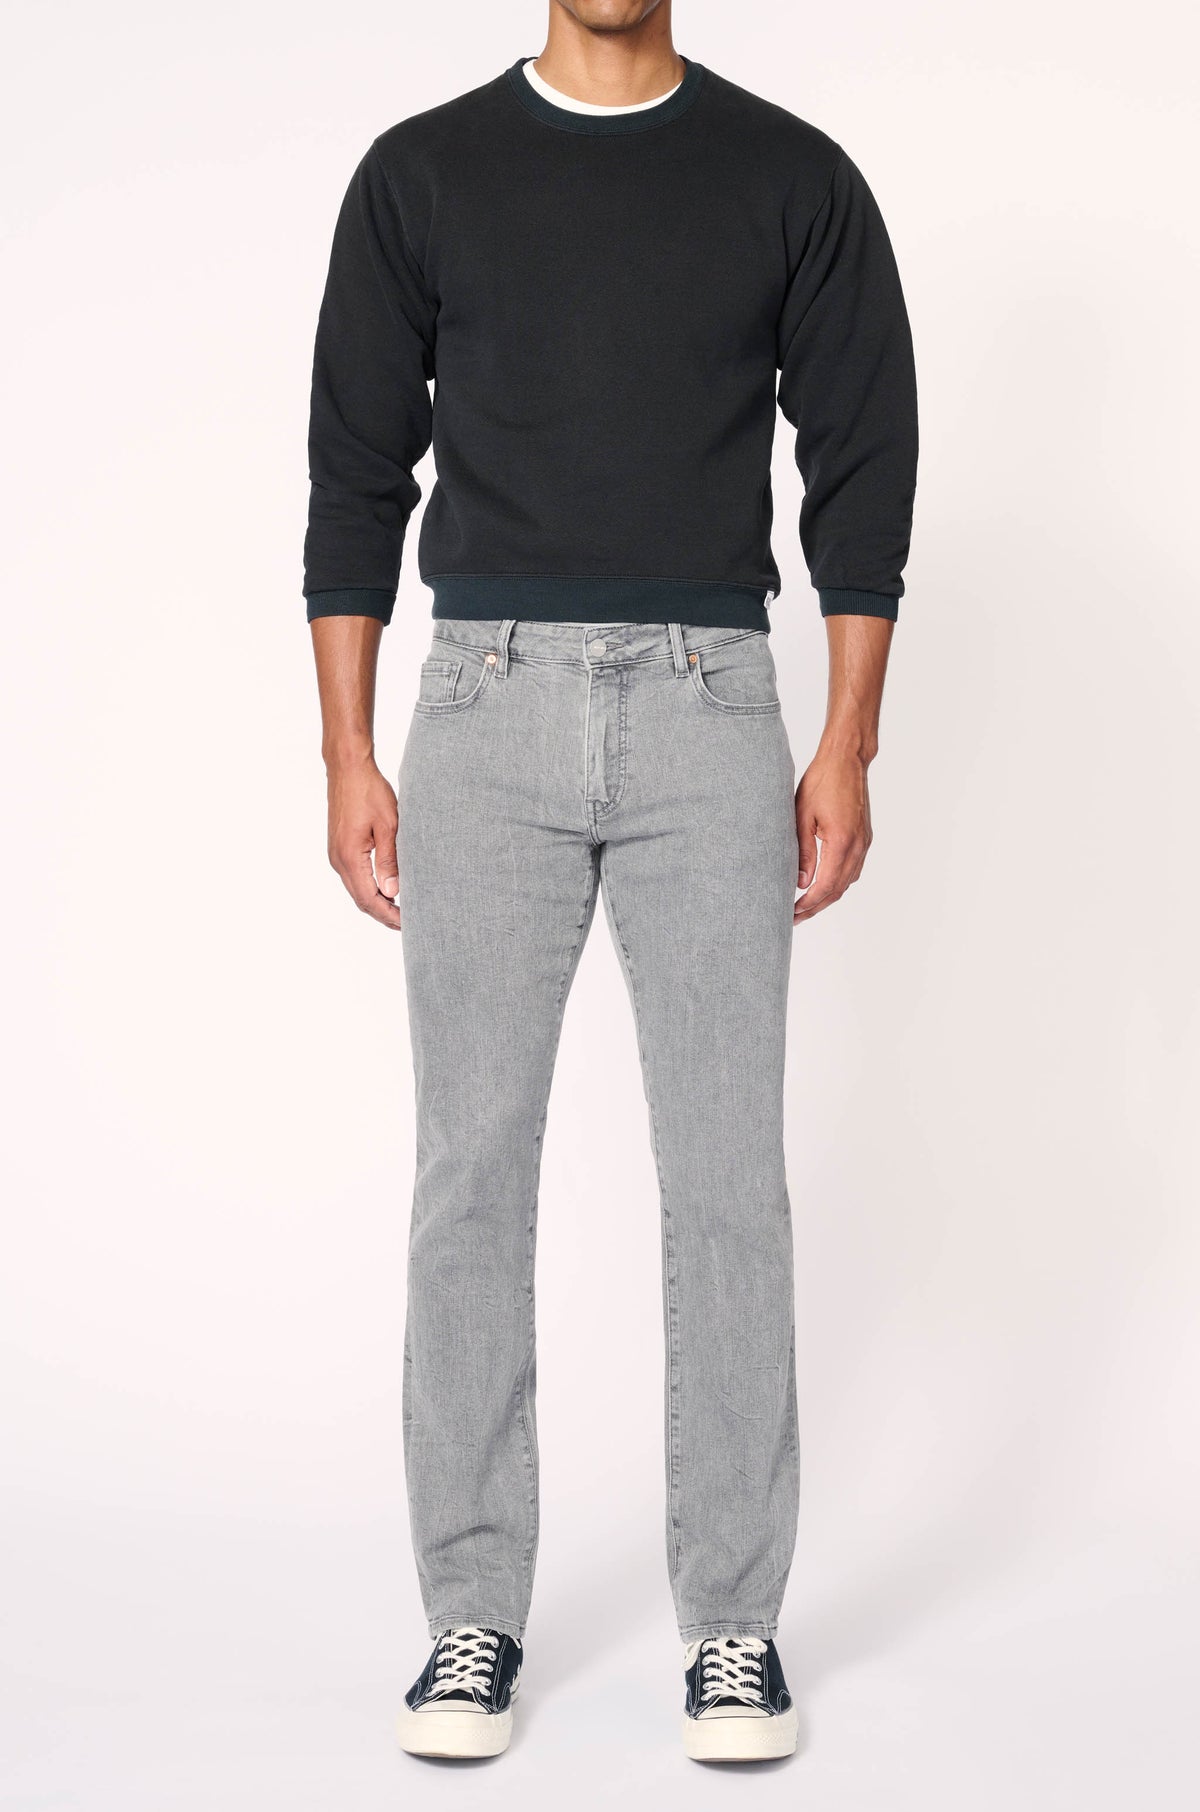 AMS - SLIM JEANS | TOUCH OF GREY